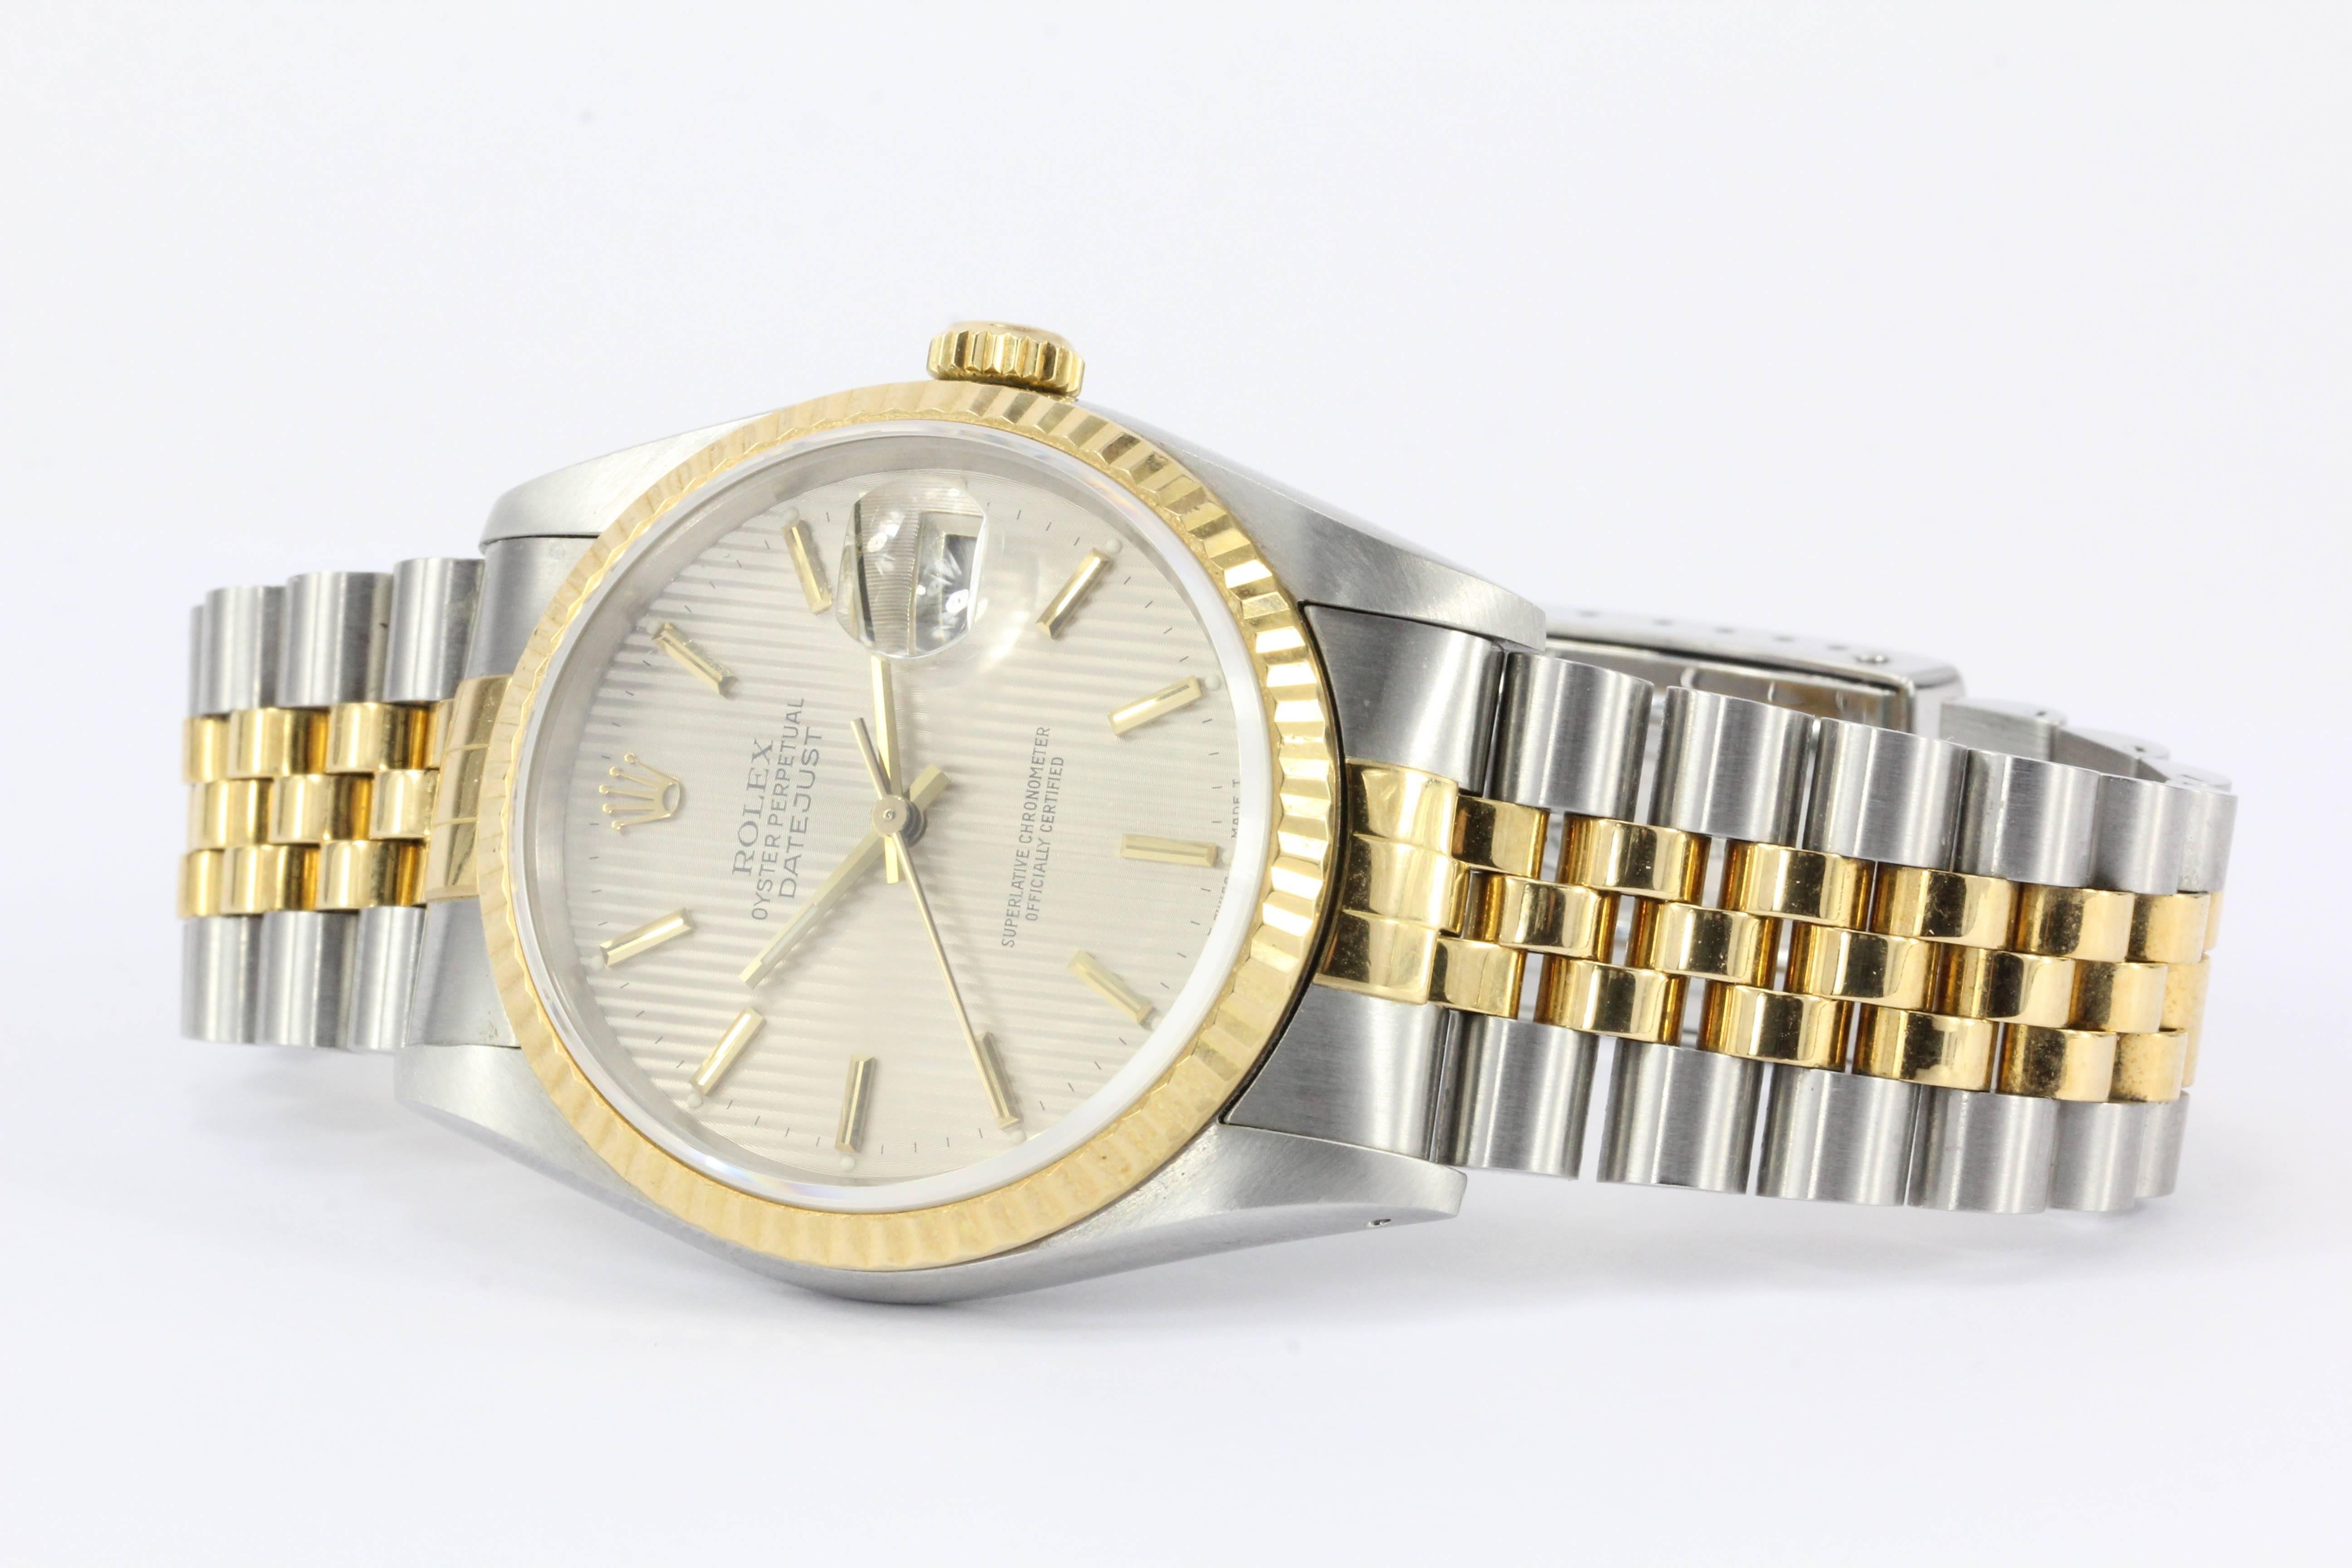 Brand: Rolex

Model #: 16233

Year: L Serial Number Circa 1990

Composition: Stainless Steel & 18K Yellow Gold

Watch Bezel: 36MM

Watch Dial: Champagne Tapestry Dial 

Crystal: Sapphire

Comes with Original Box & Papers 

Condition: Fabulous estate